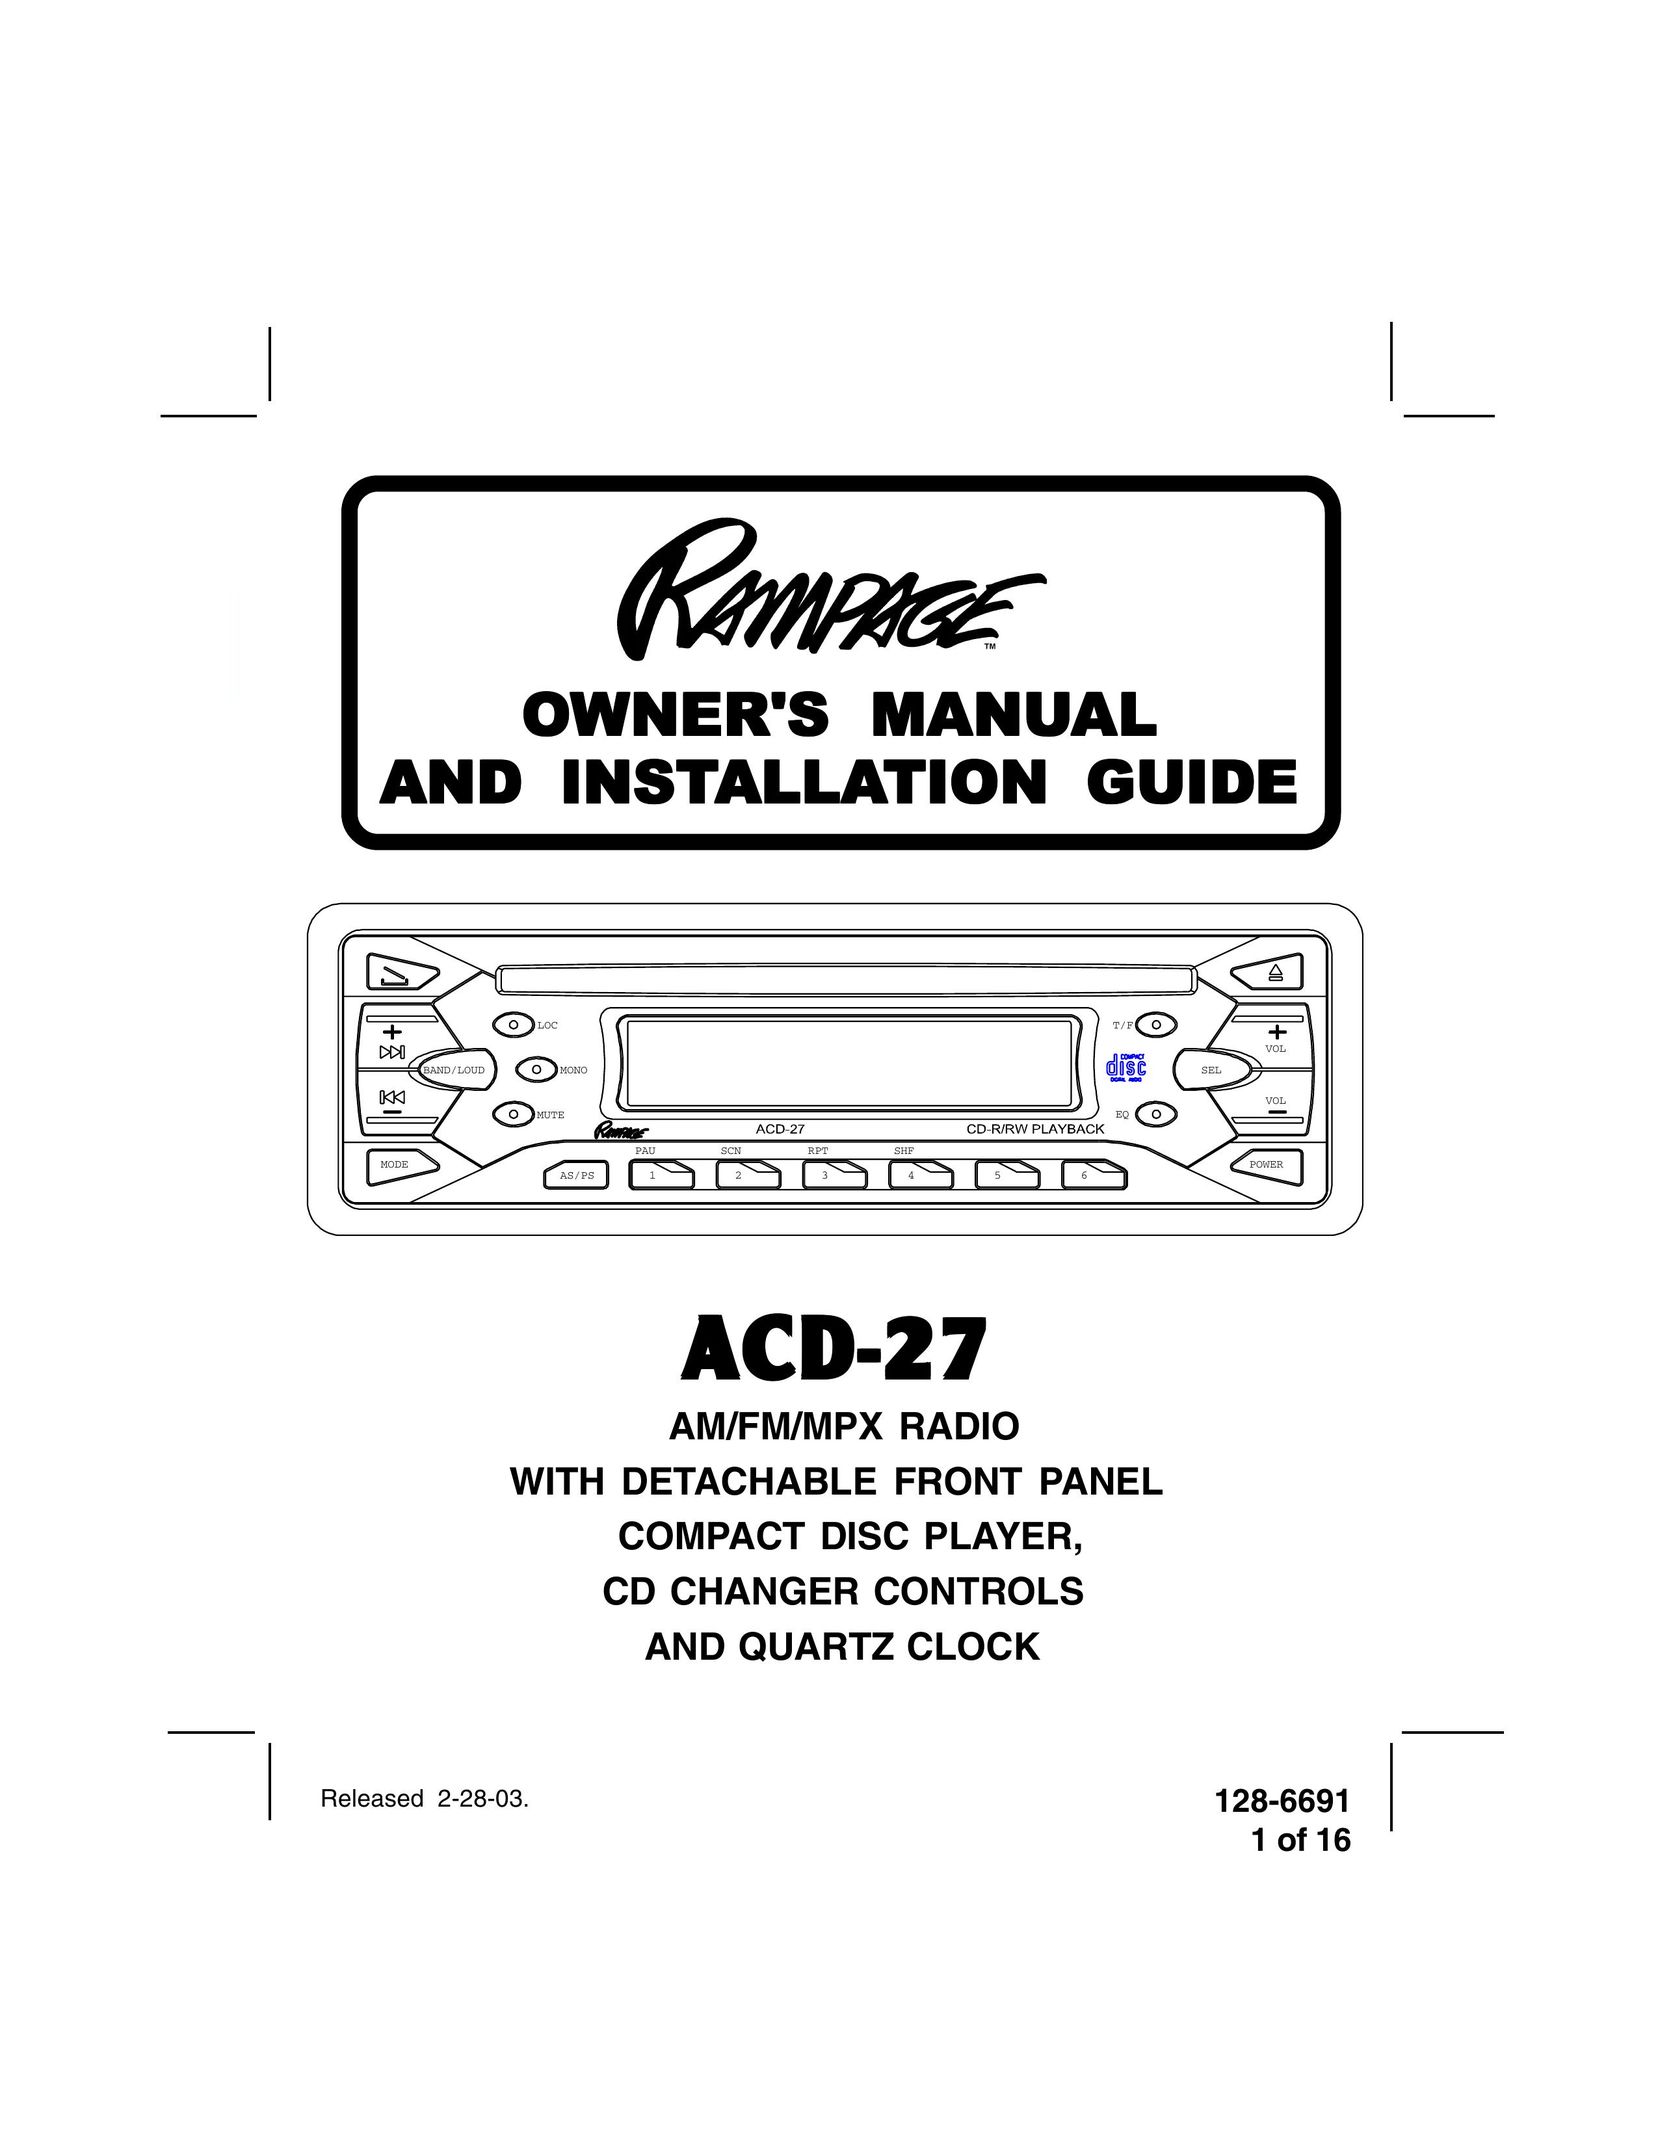 Audiovox ACD-27 Car Stereo System User Manual